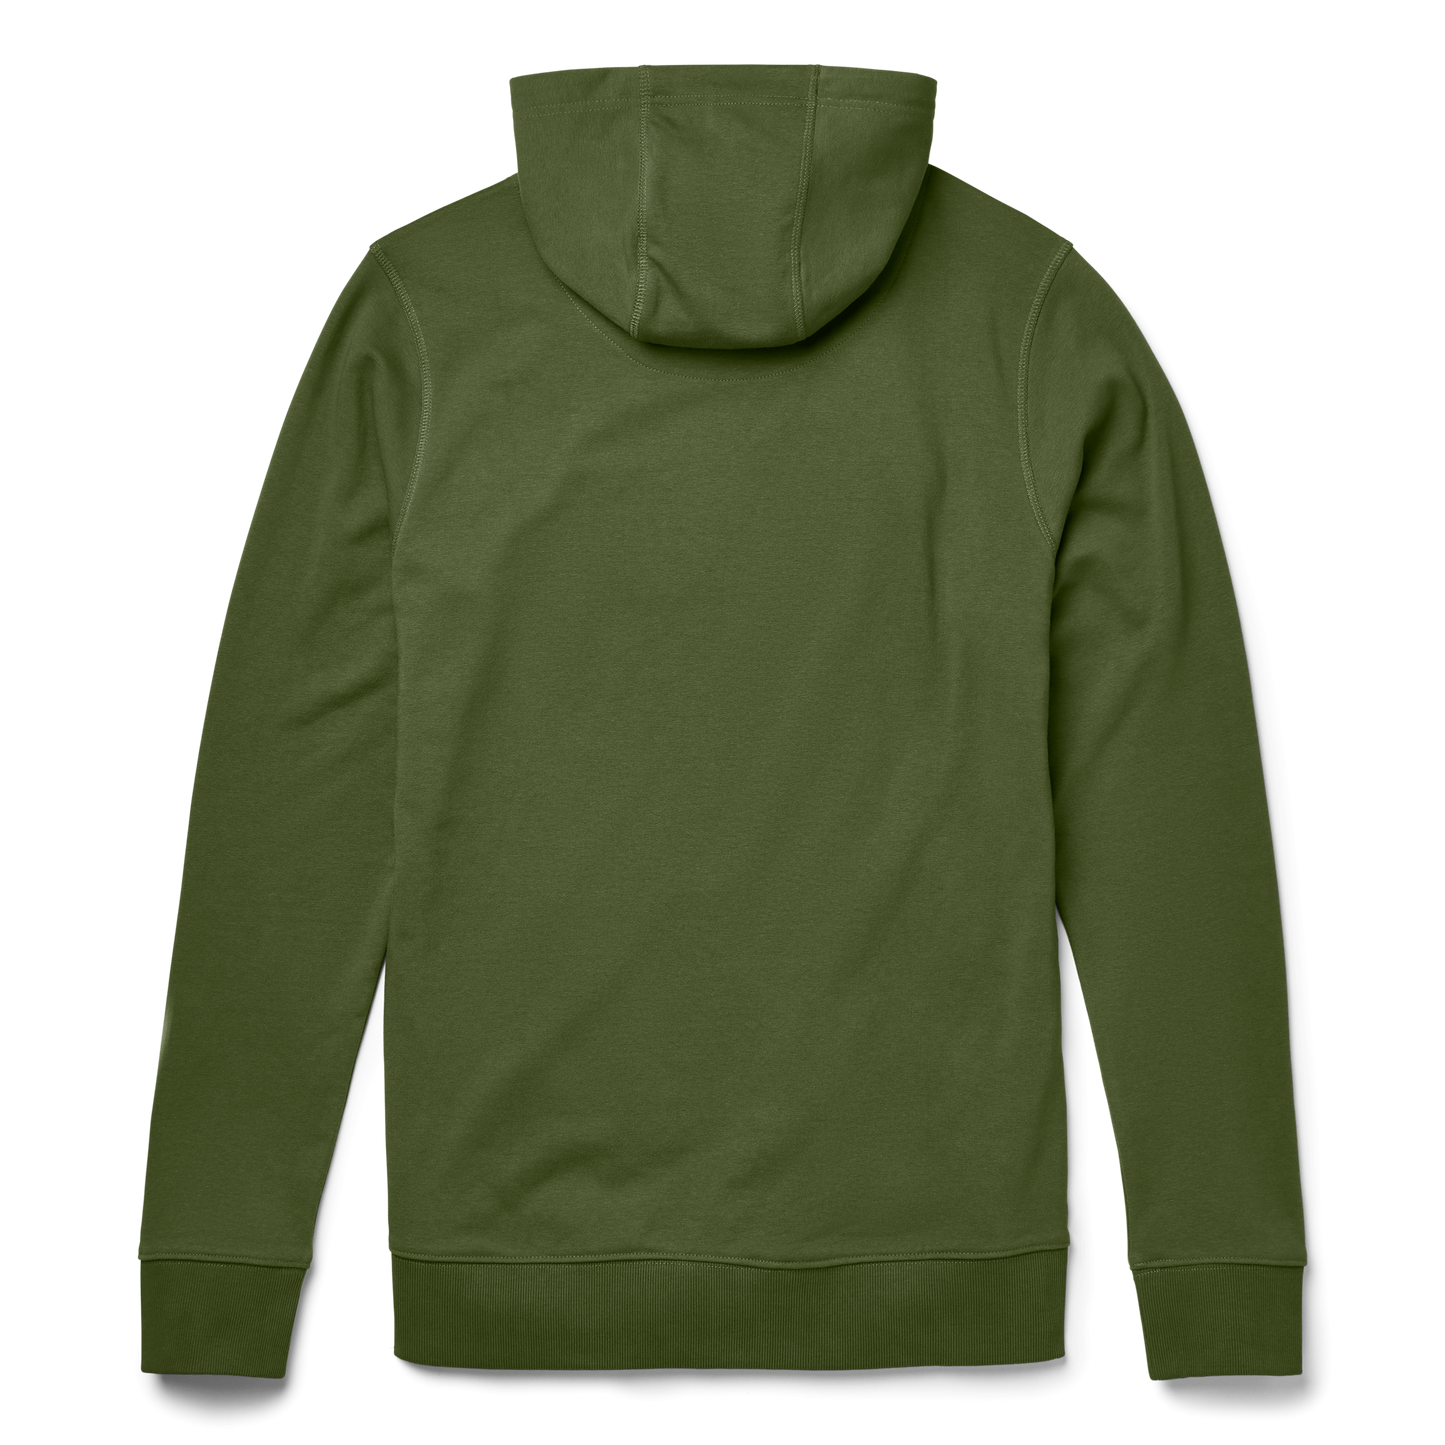 YETI French Terry Hoodie Highlands Olive